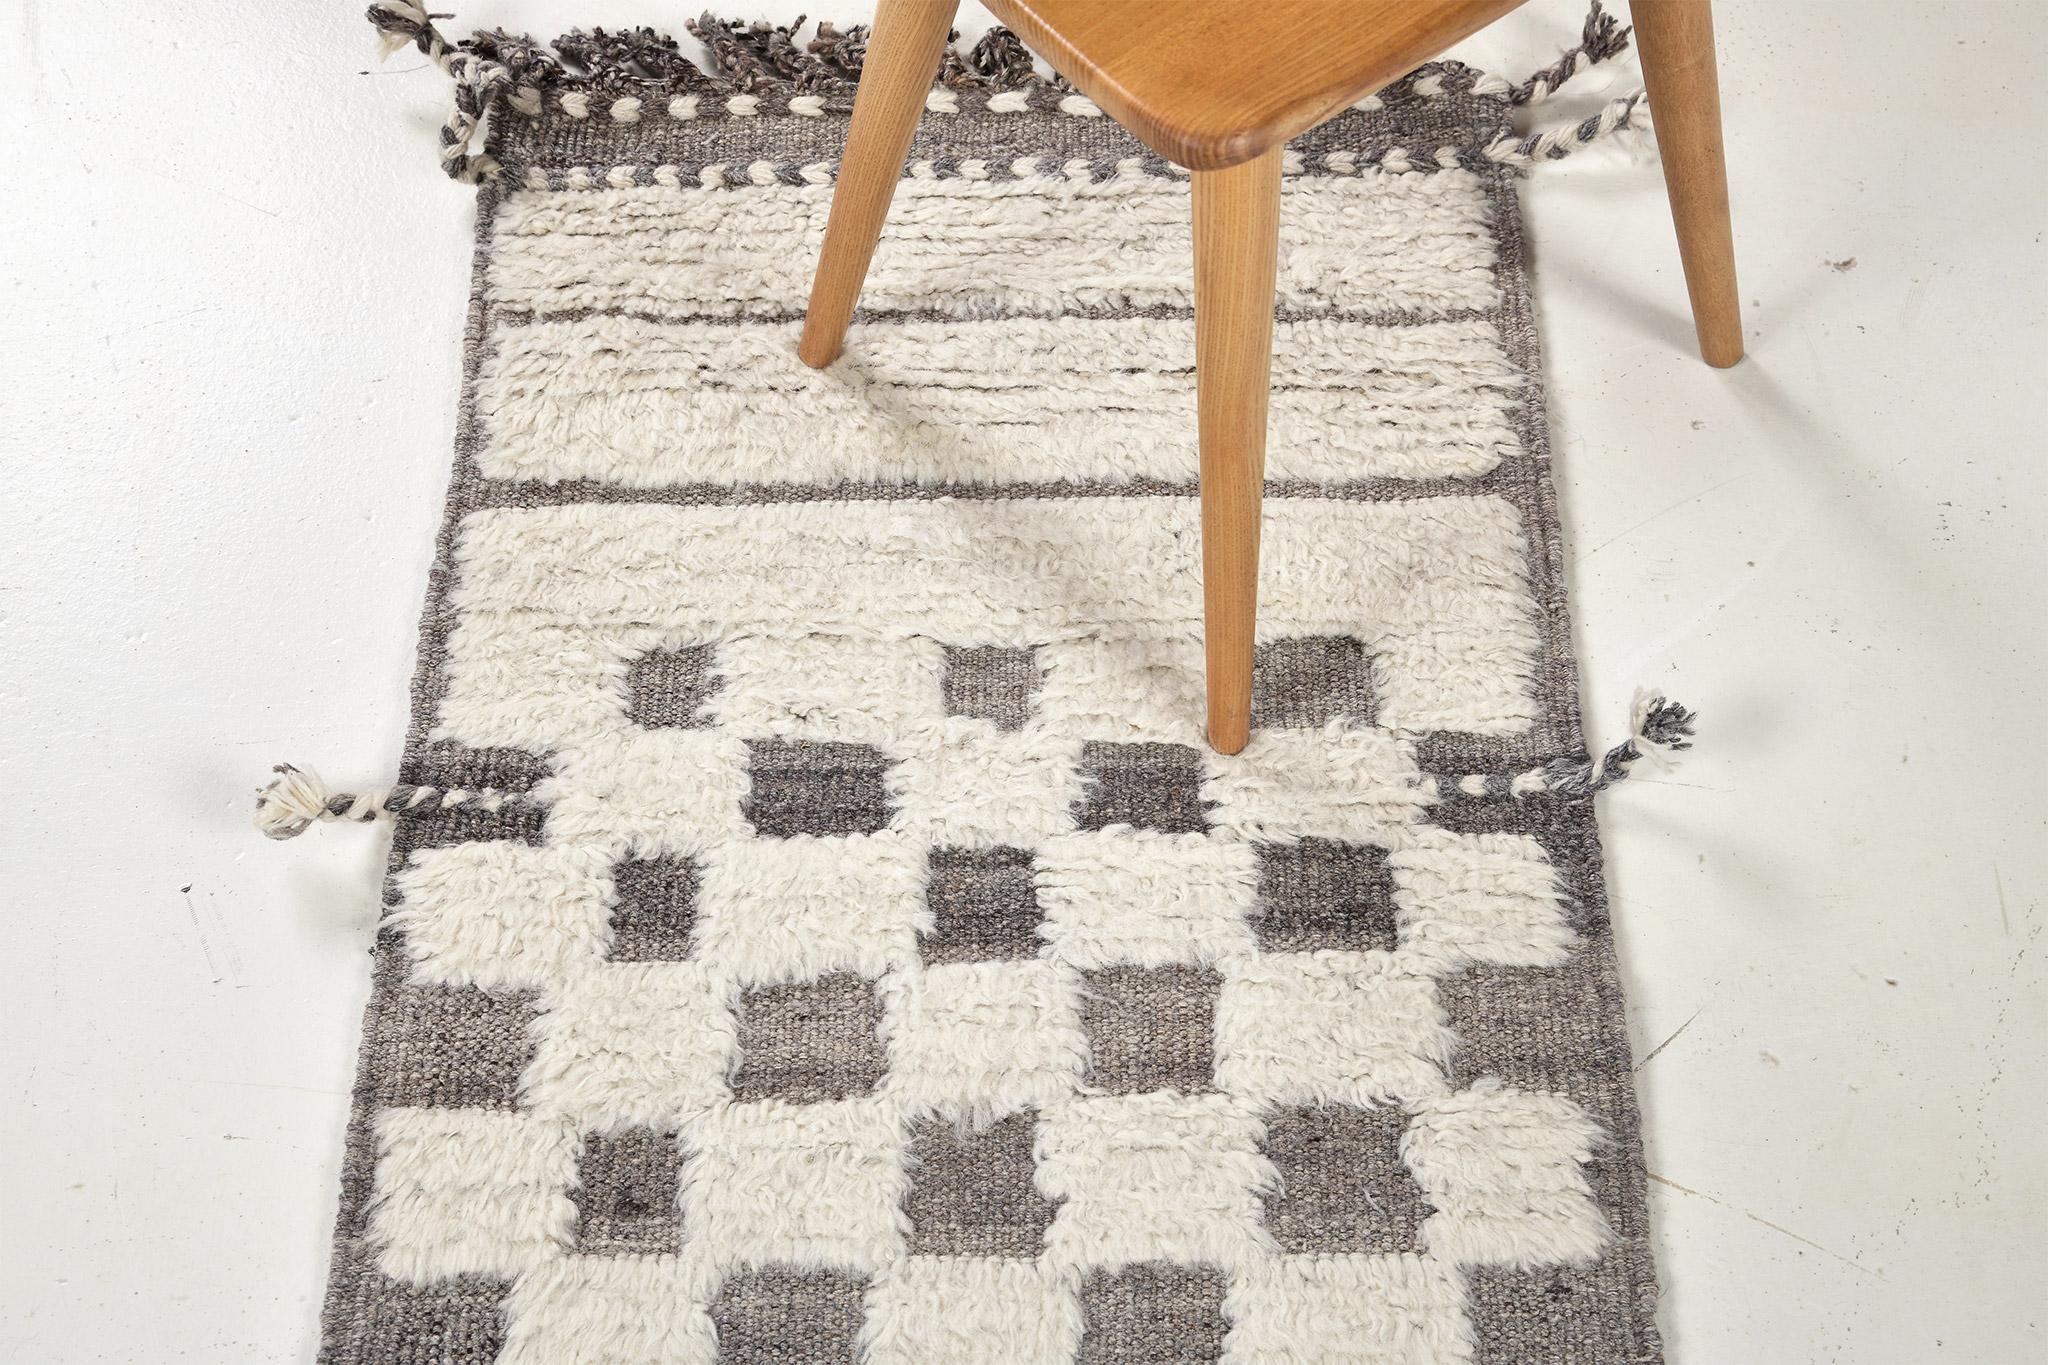 Sirocco' is a stunning hand woven gray rug with embossed detailing in a checkered pattern atop a natural ivory pile weave. Beautiful tassels and bordered designs add a timely and one of a kind essence for the modern design world. Haute Bohemian